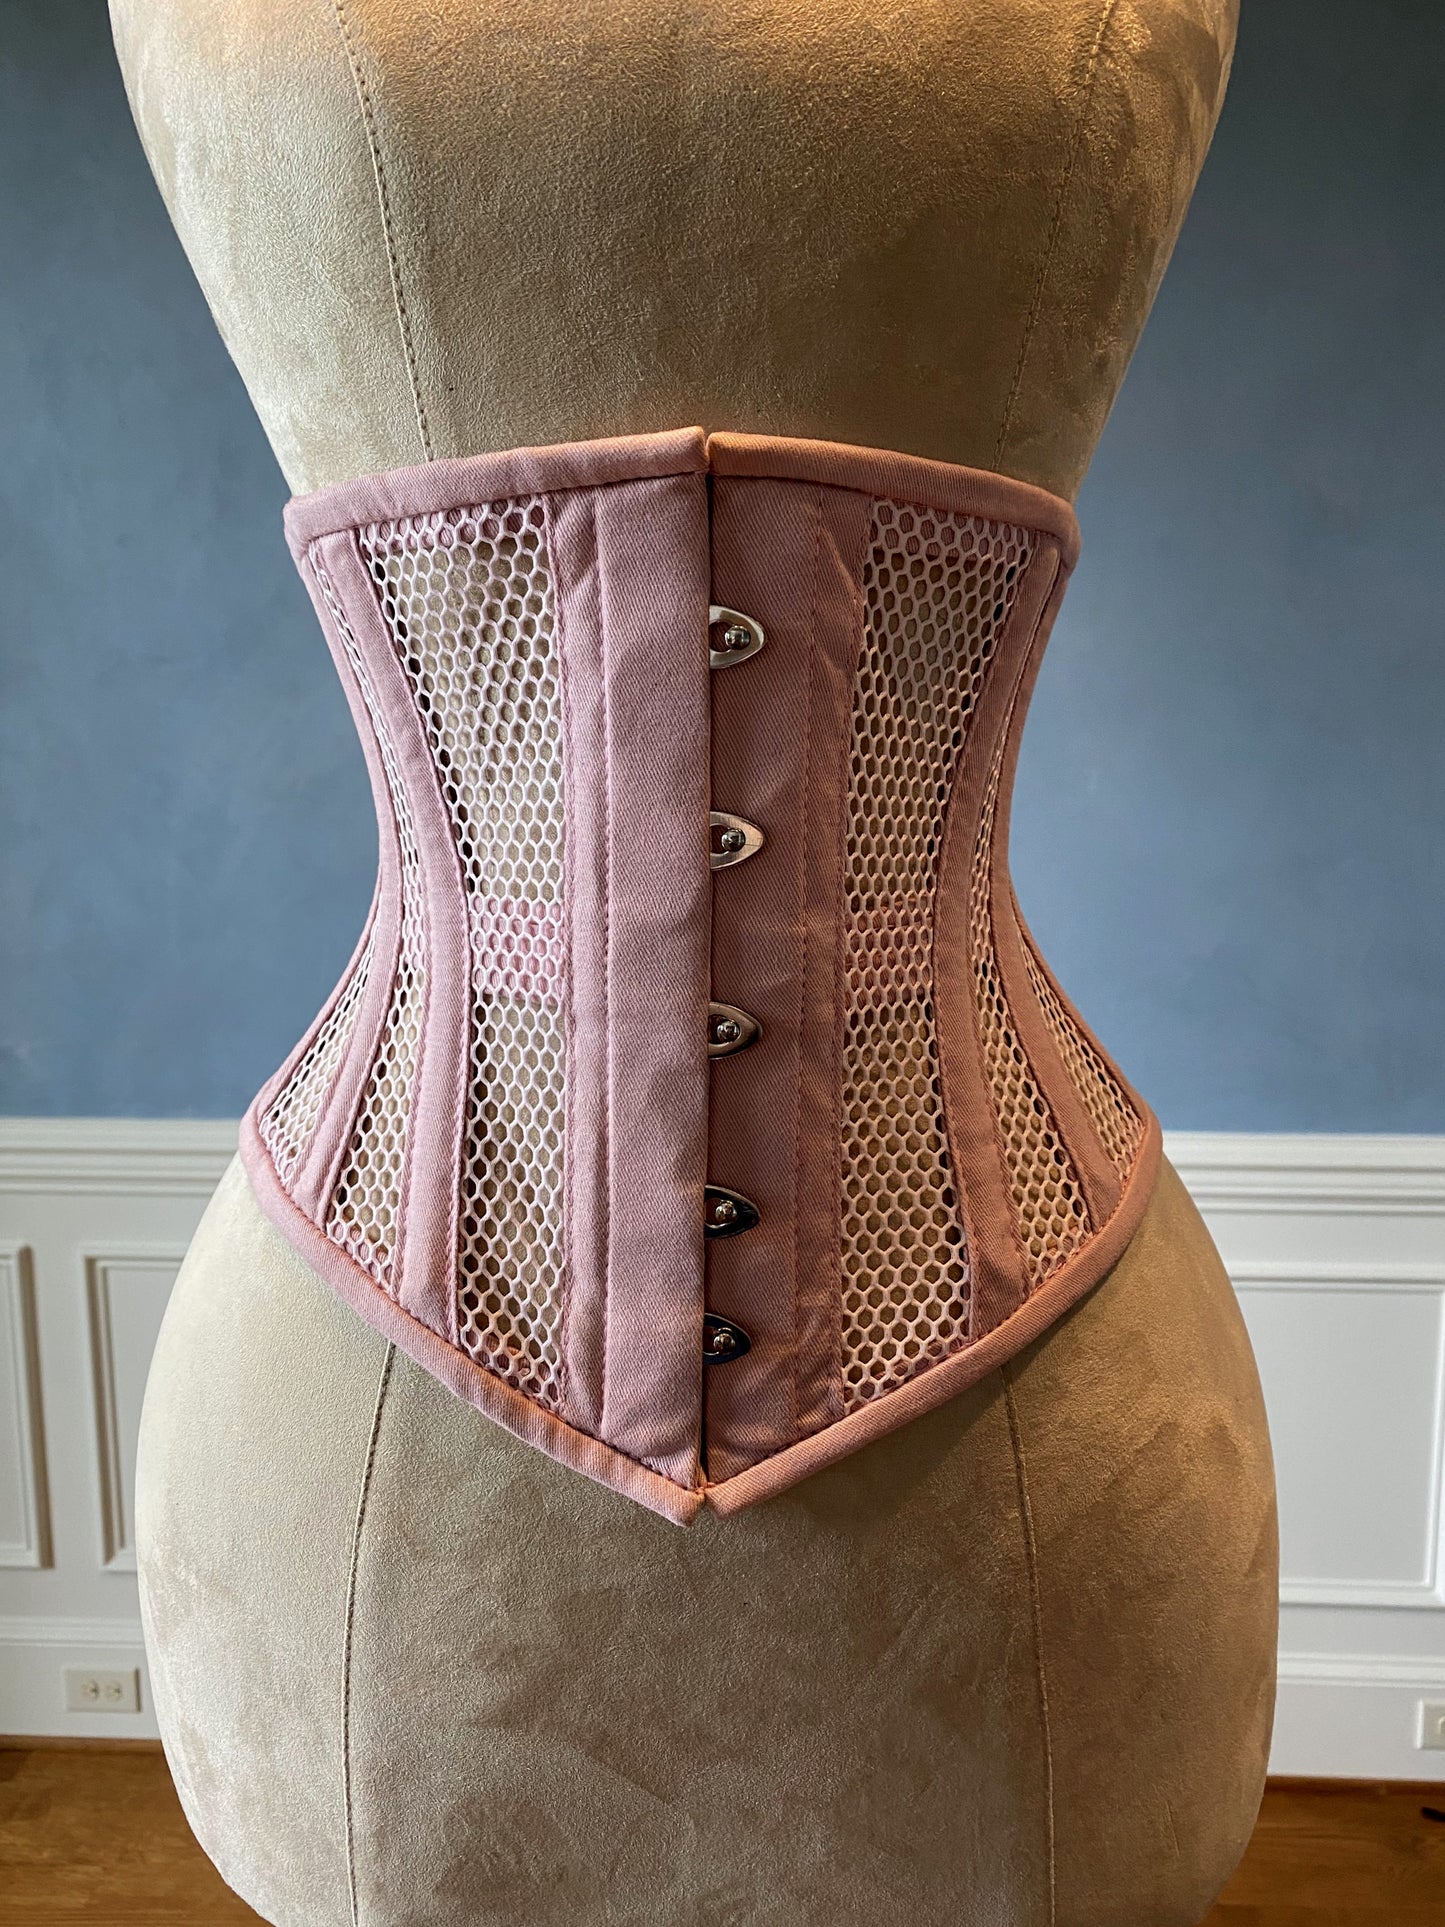 Buy Real Steel Boned Underbust Corset From Blue Transparent Mesh and  Cotton. Real Waist Training Corset for Tight Lacing. Online in India 